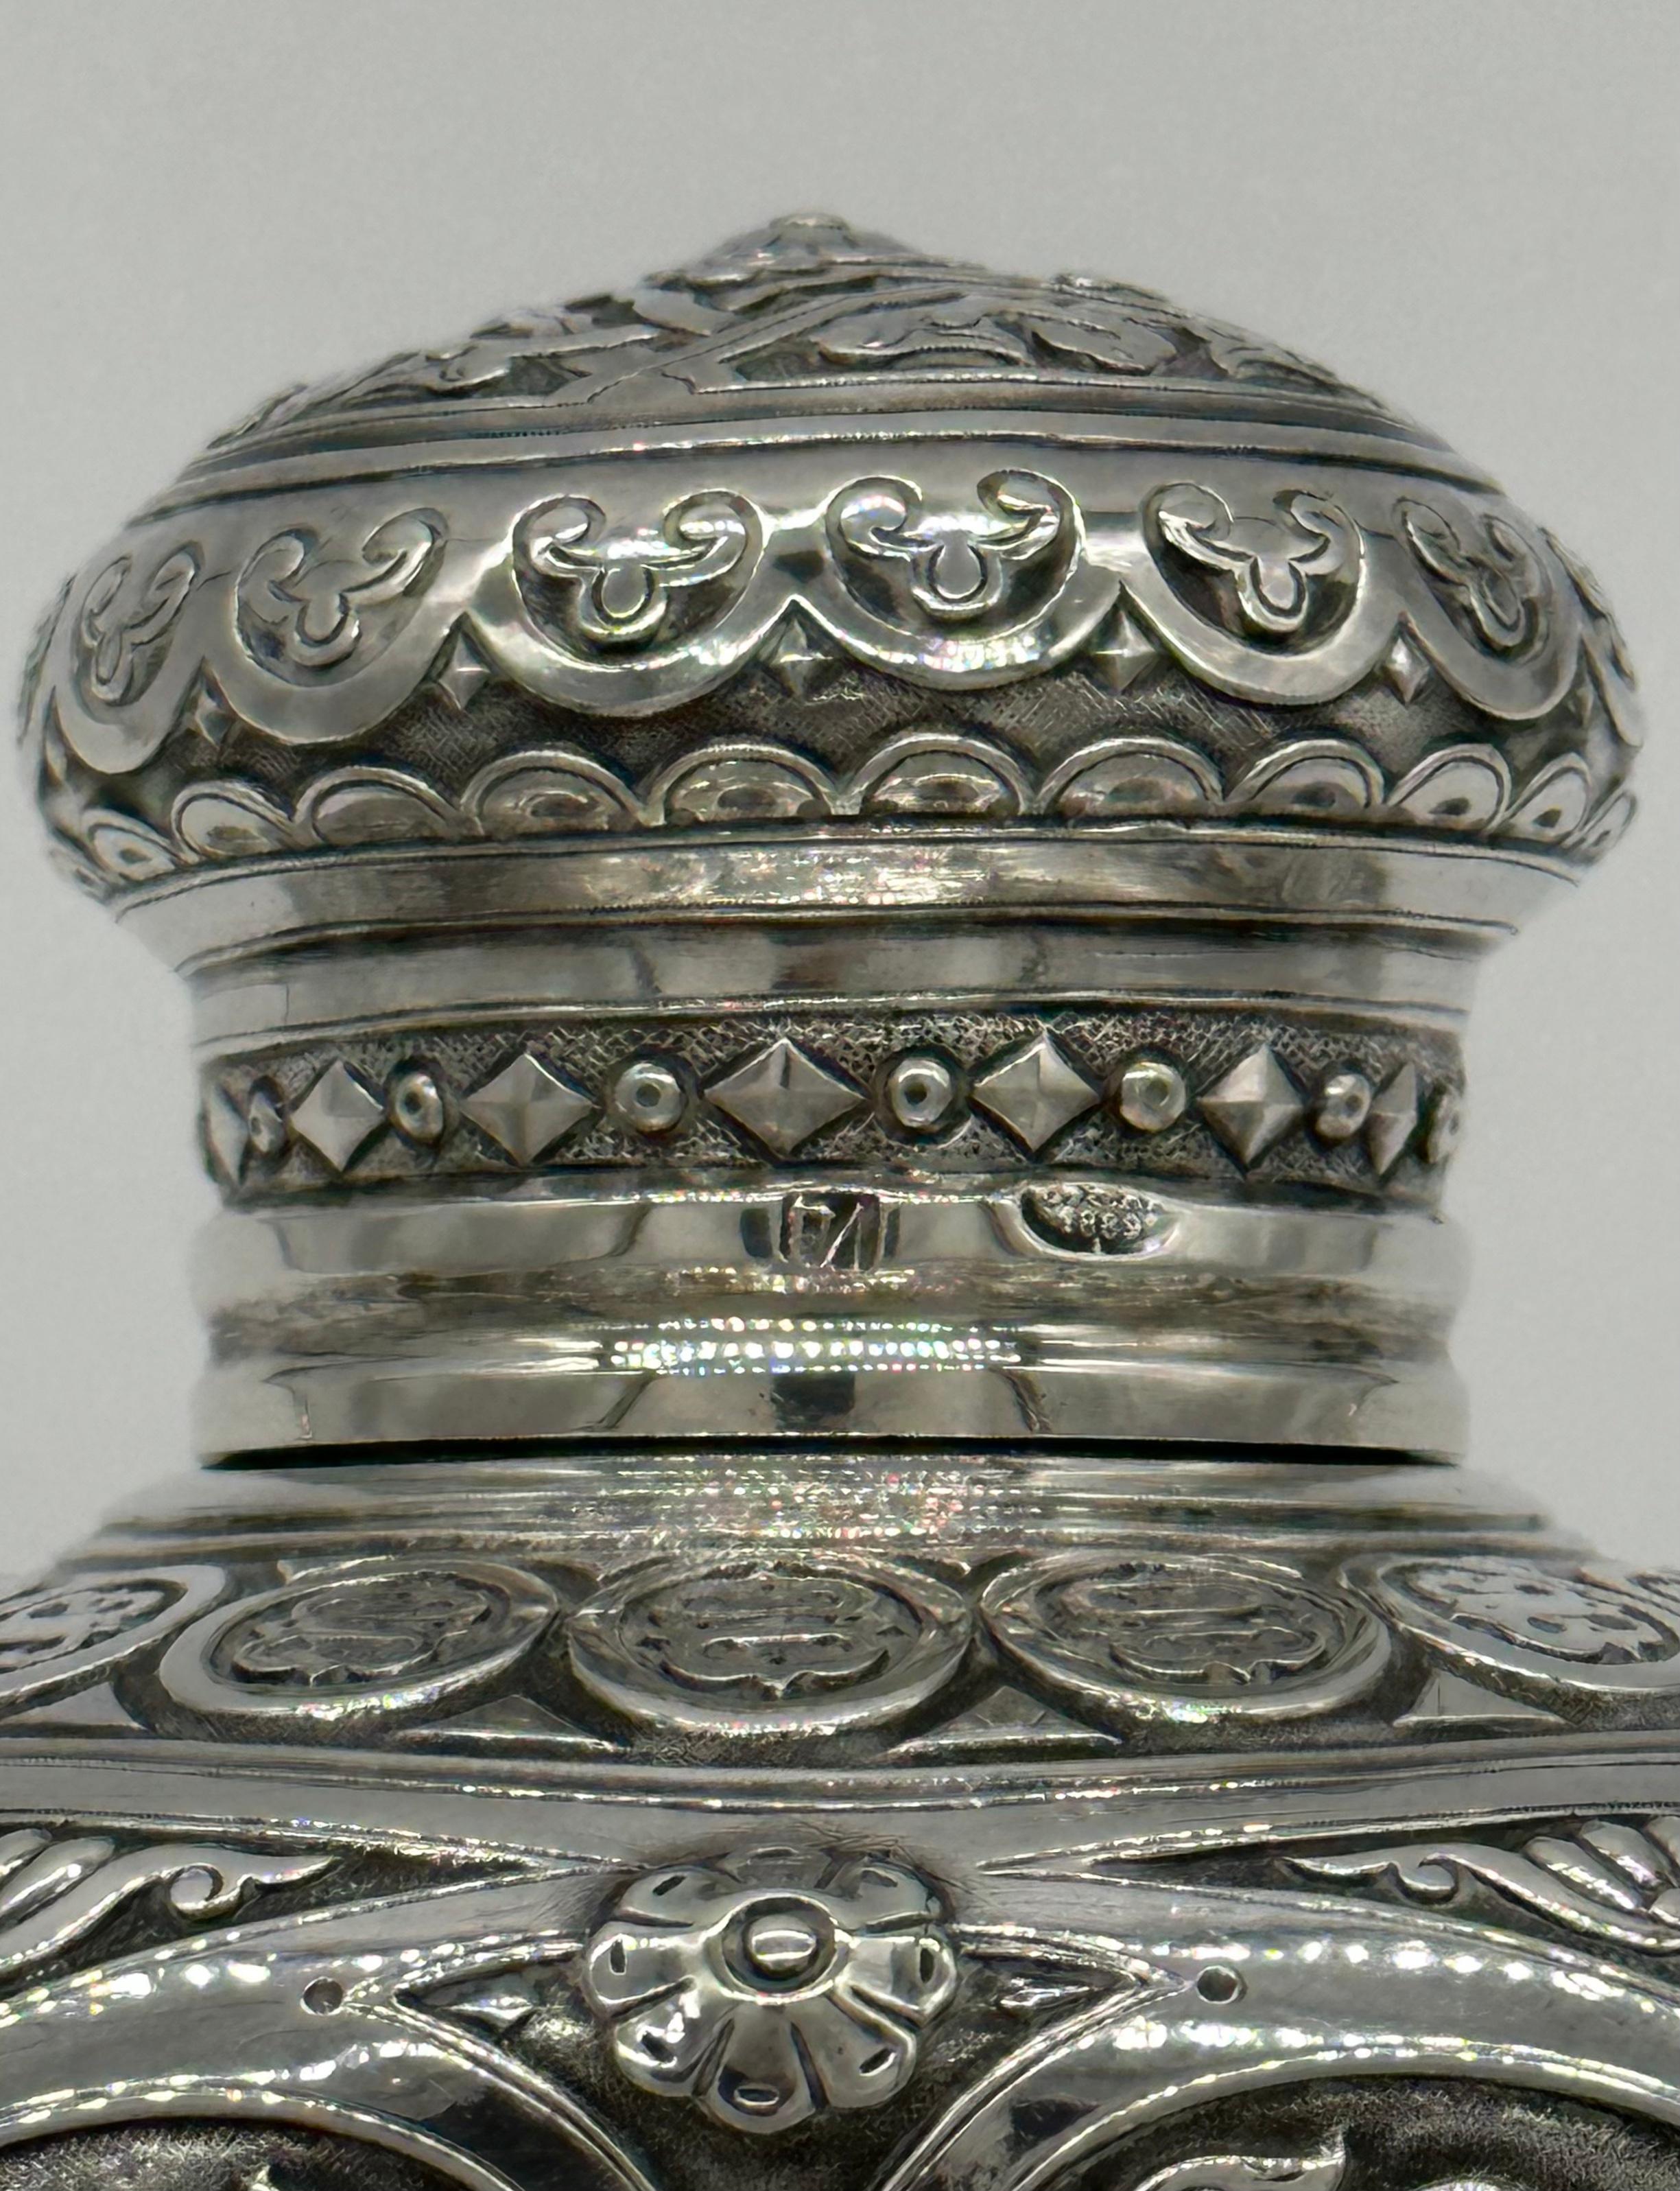 Amazing Antique Russian Imperial Silver Tea Caddy, Loskutov, Moscow 1889 11